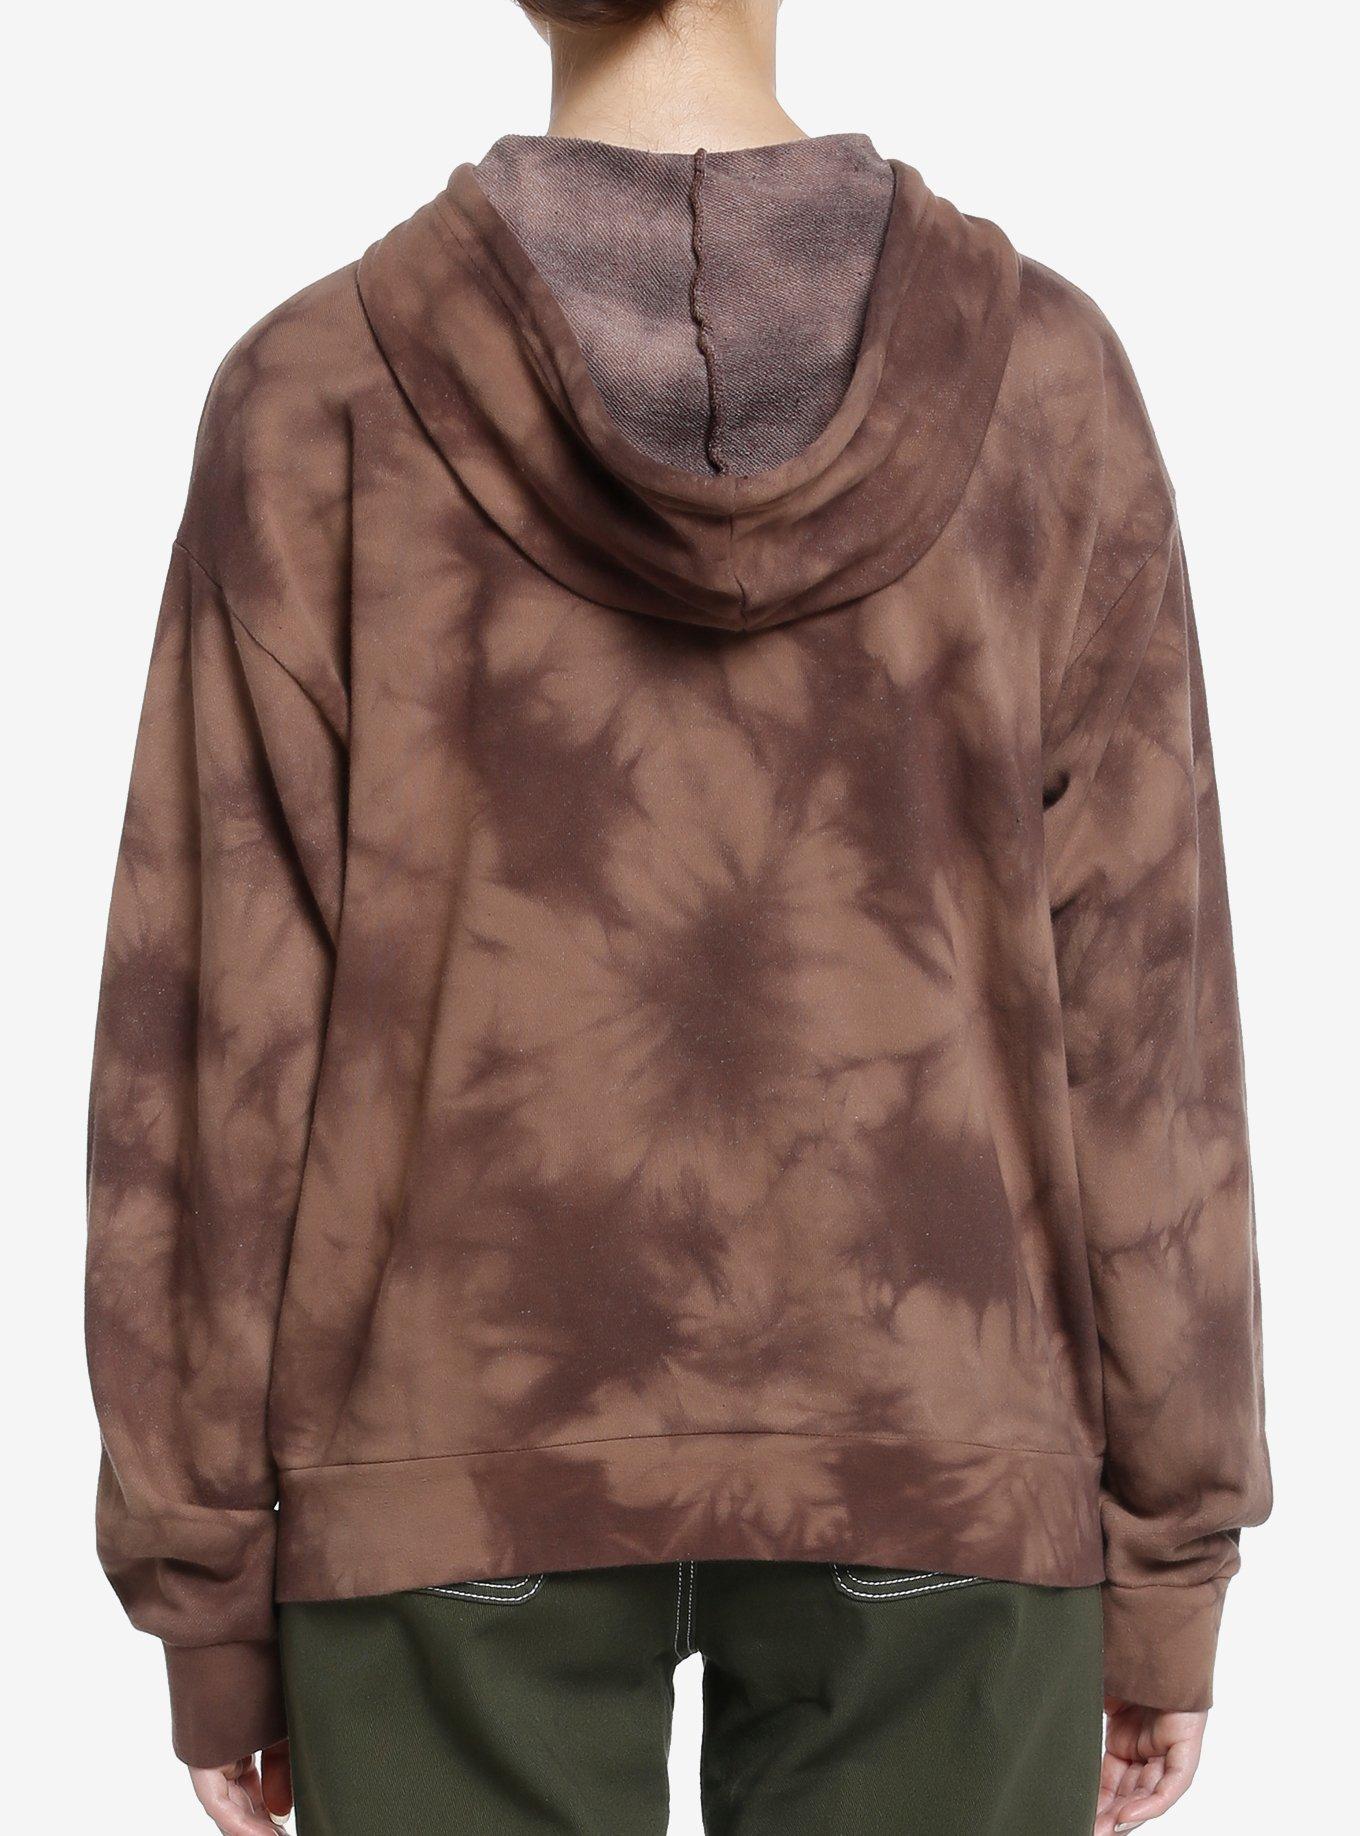 Thorn & Fable Butterfly Skull Brown Wash Girls Oversized Hoodie, BROWN, alternate